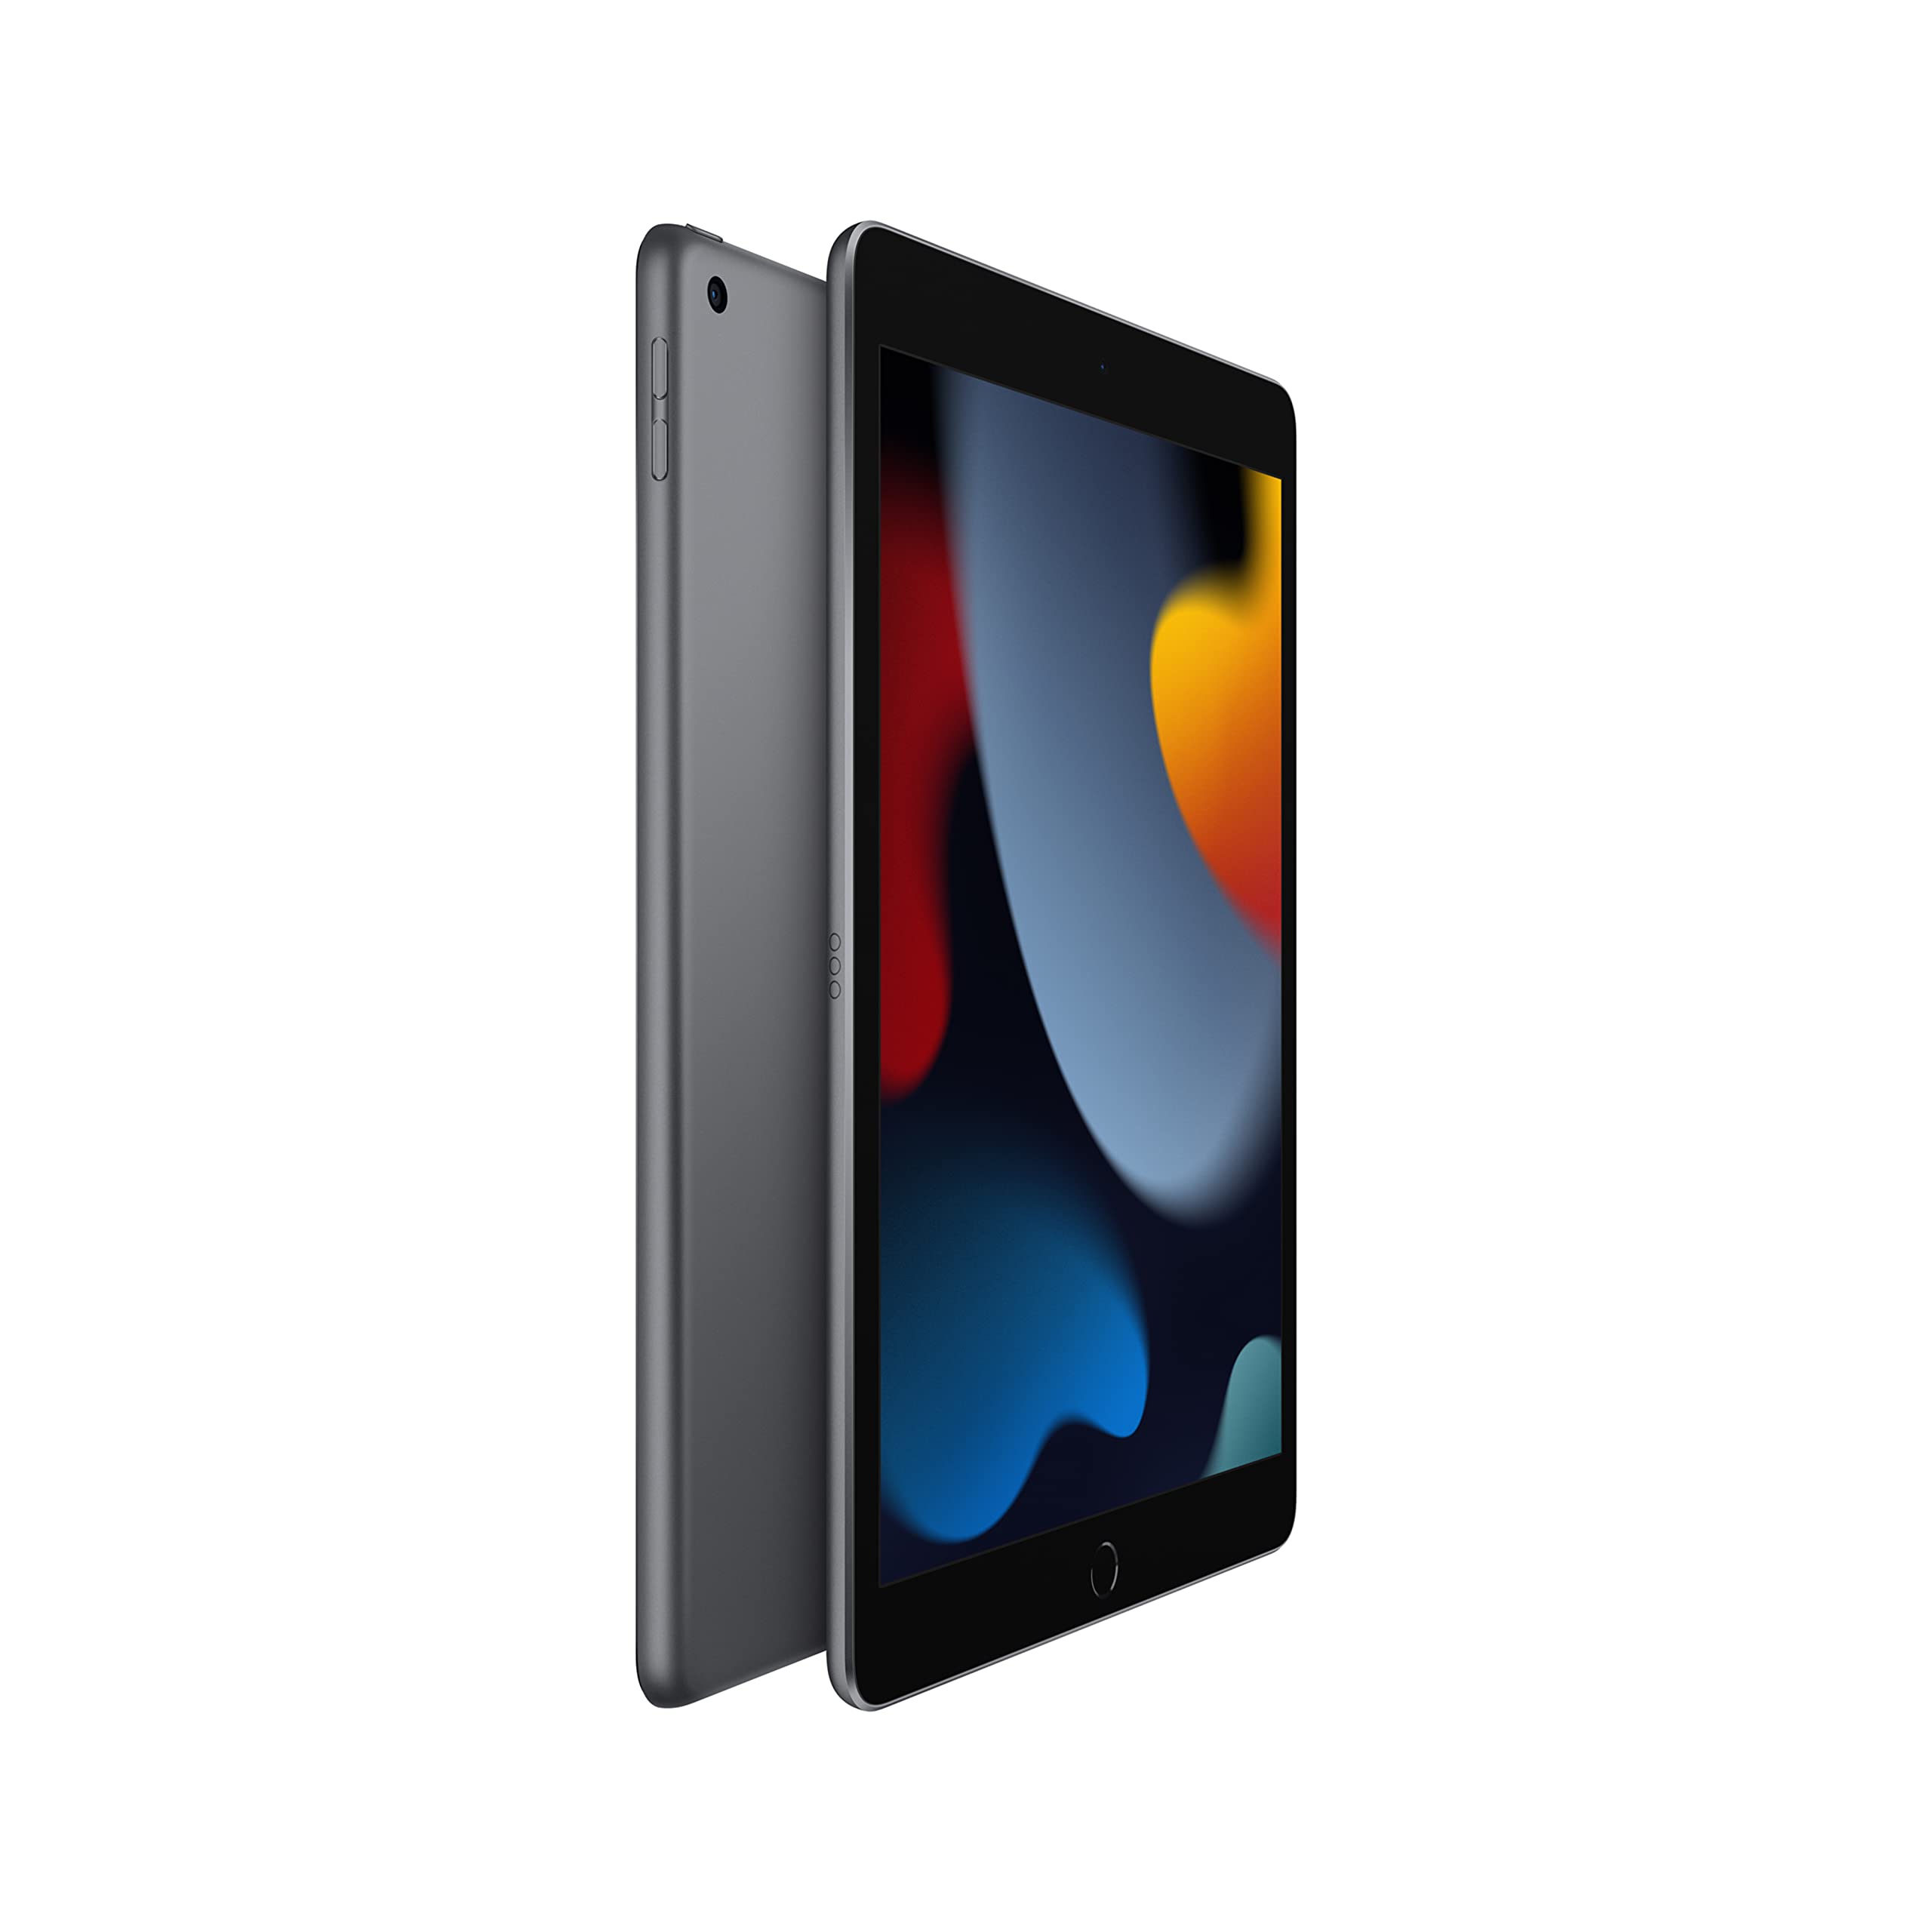 Limited-Time Offer: Get the New Apple iPad 9th Gen at an Unbeatable Price! $269.99